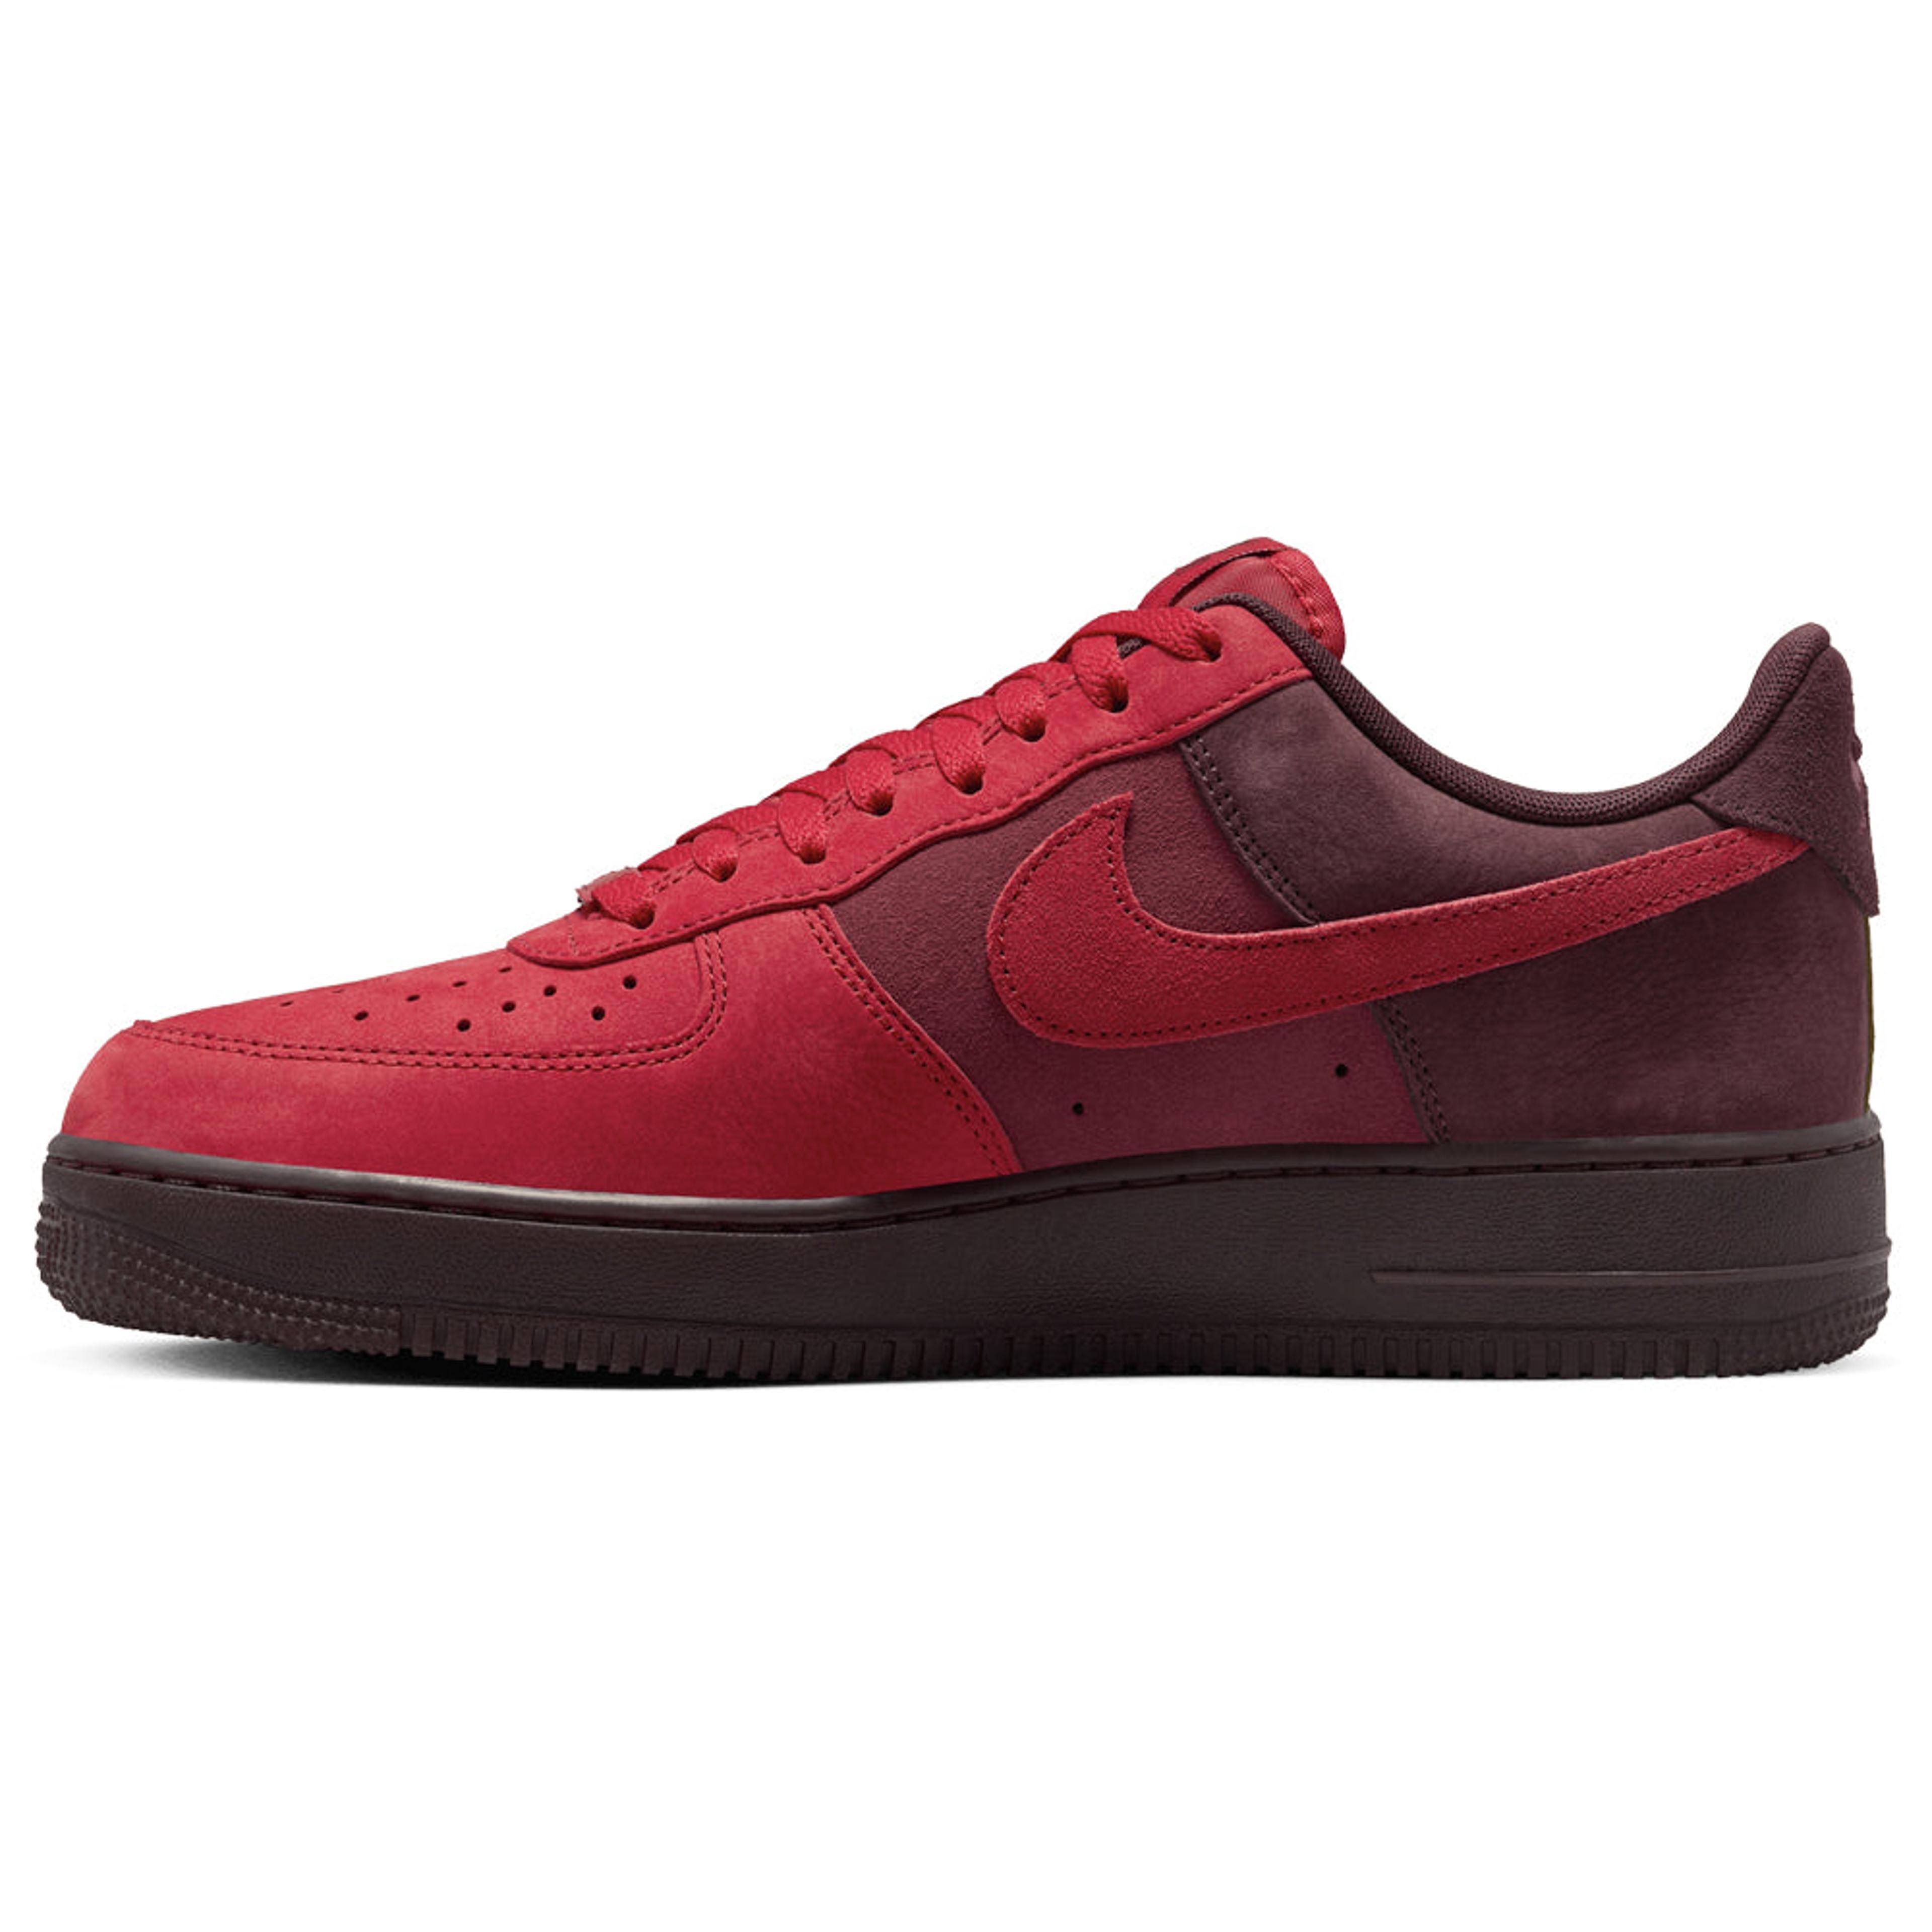 Alternate View 8 of Air Force 1 '07